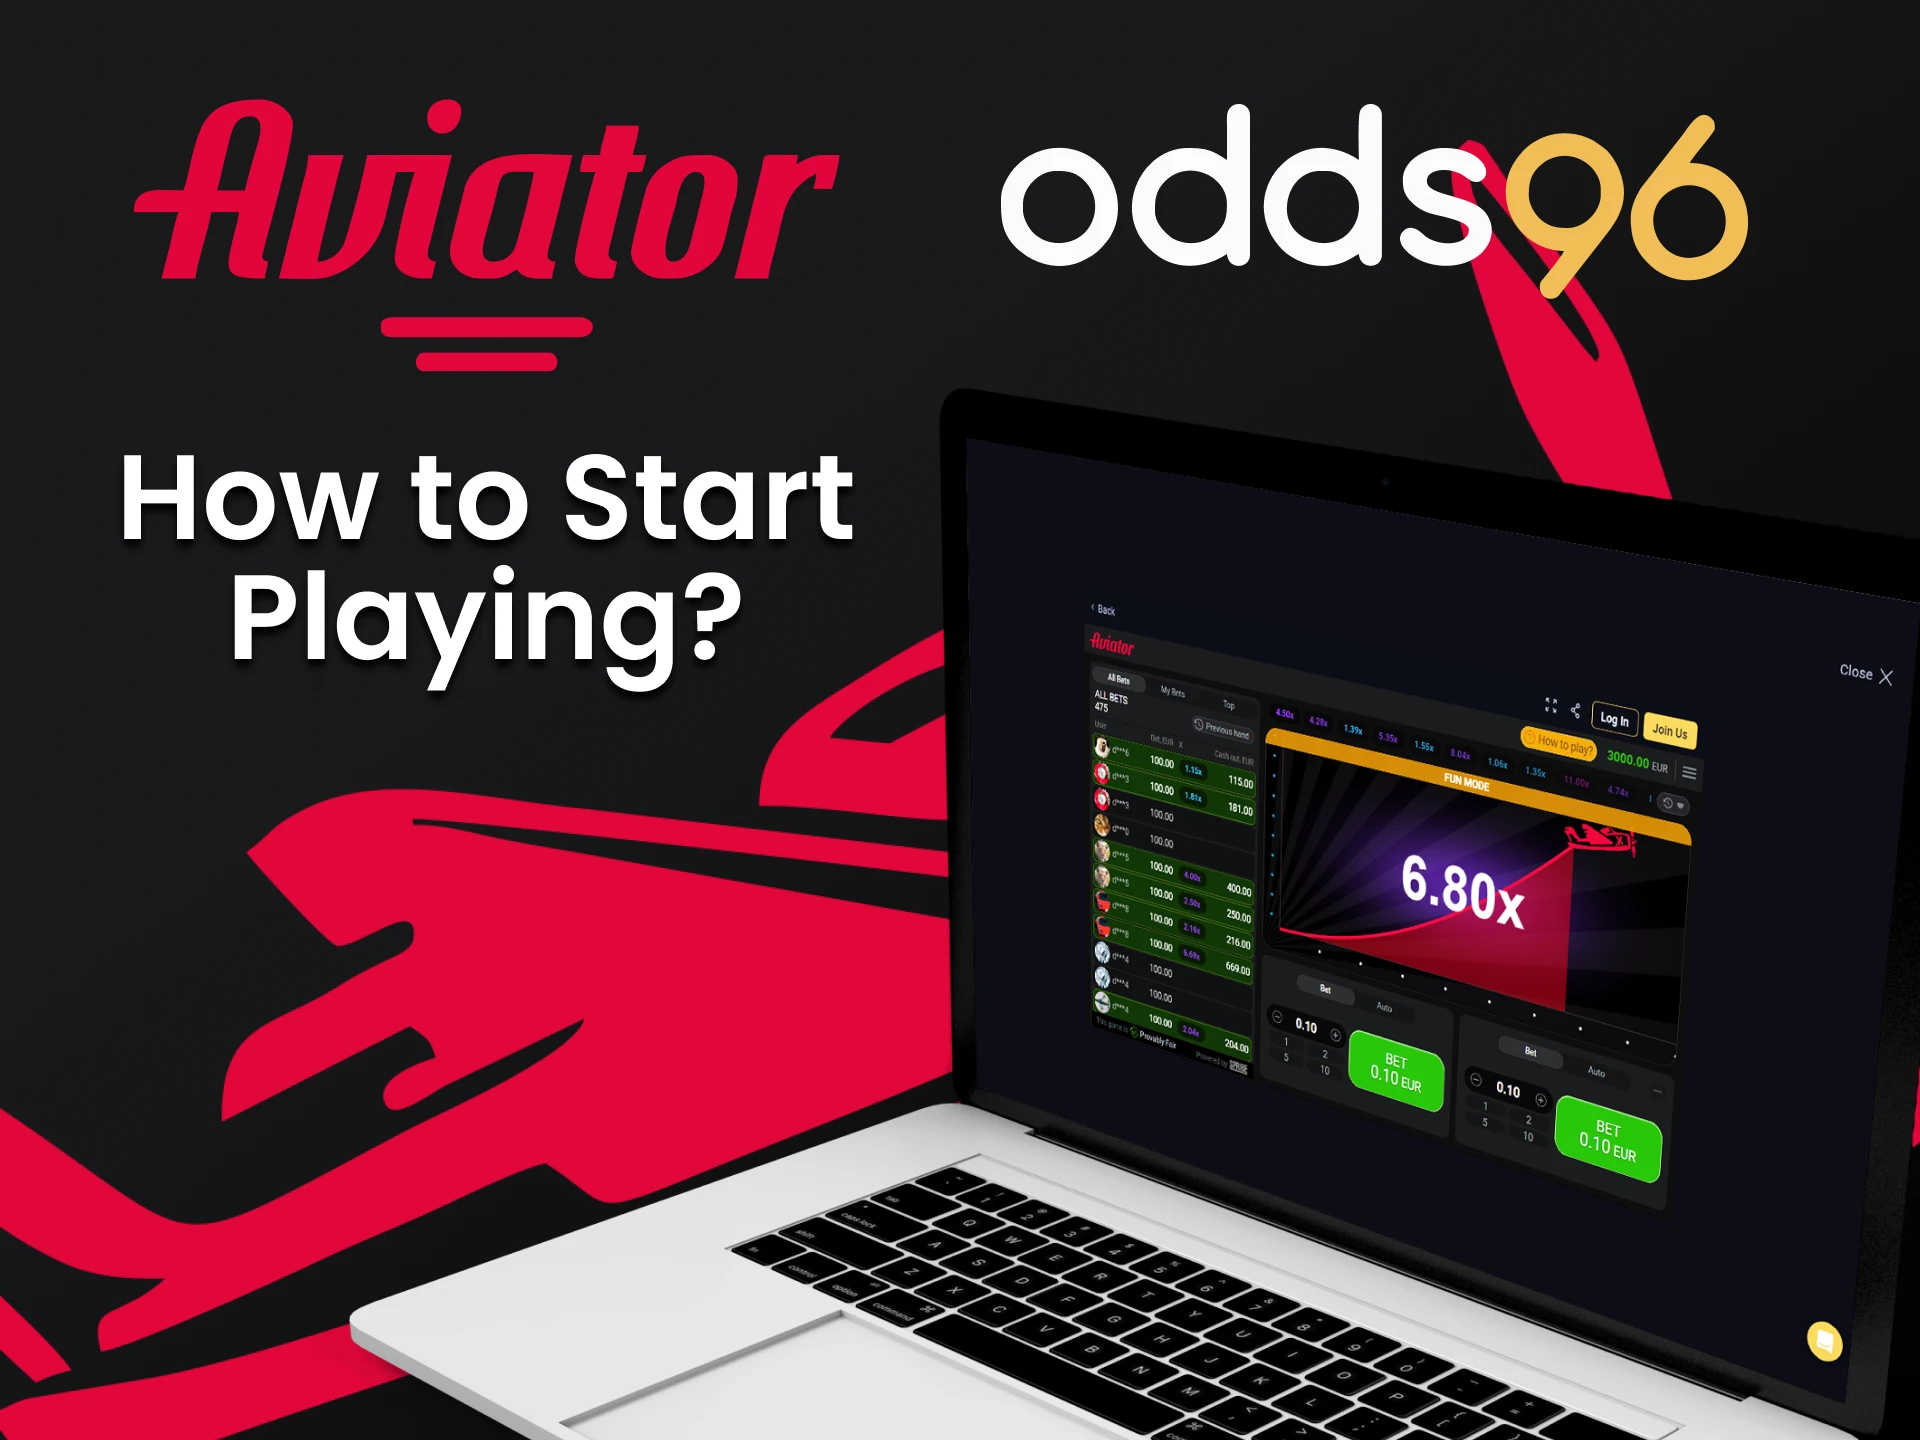 Choose the right section on Odds96 to play Aviator.